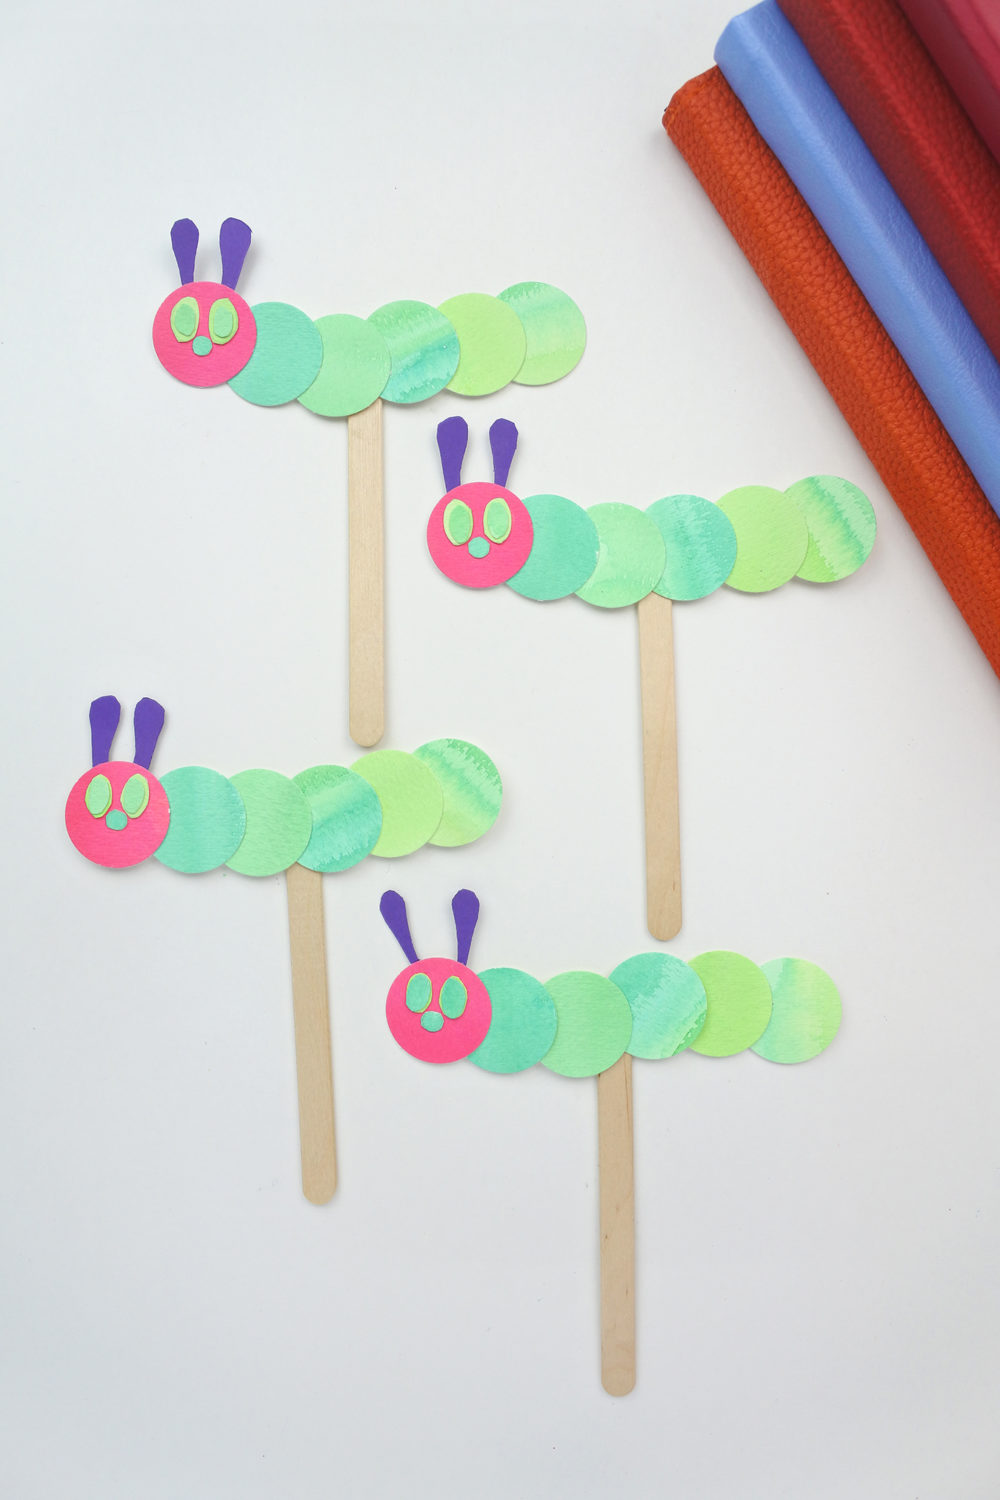 The Very Hungry Caterpillar Inspired Bookmark - Tombow USA Blog